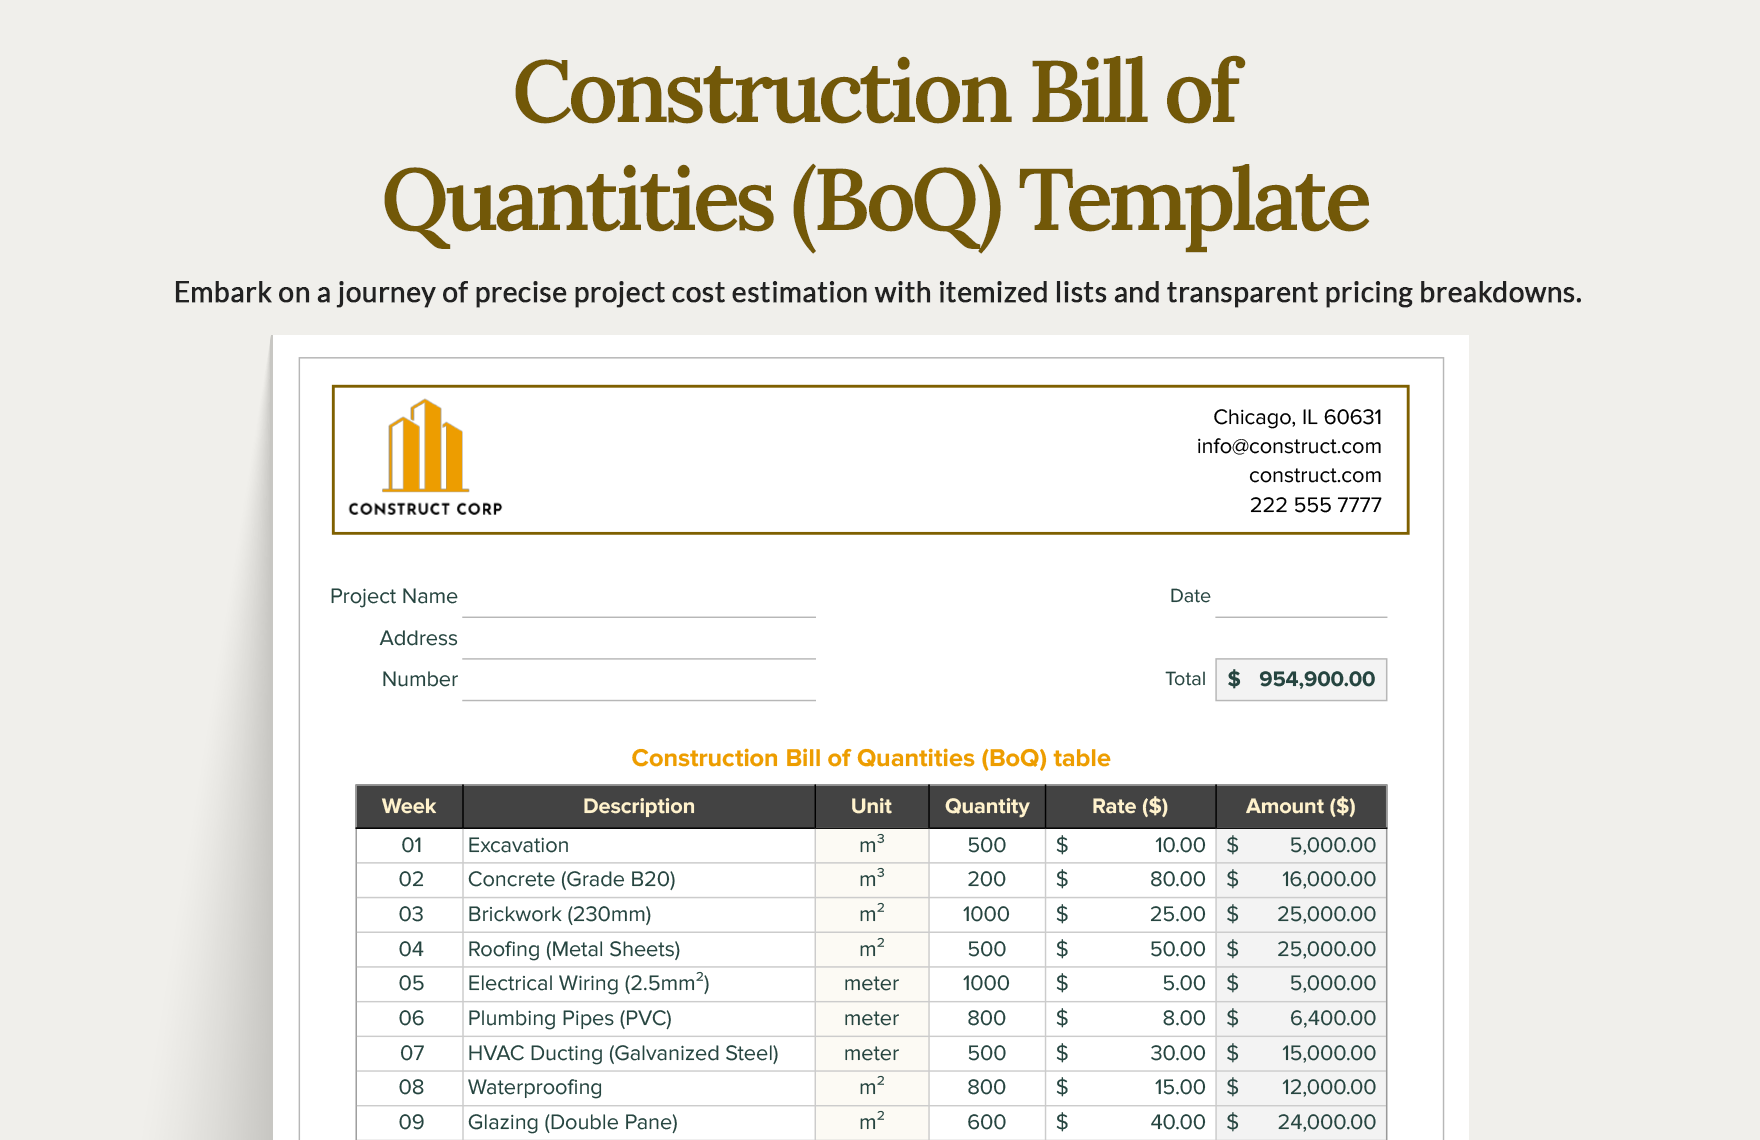 Construction Bill of Quantities (BoQ) Template in Excel, Google Sheets